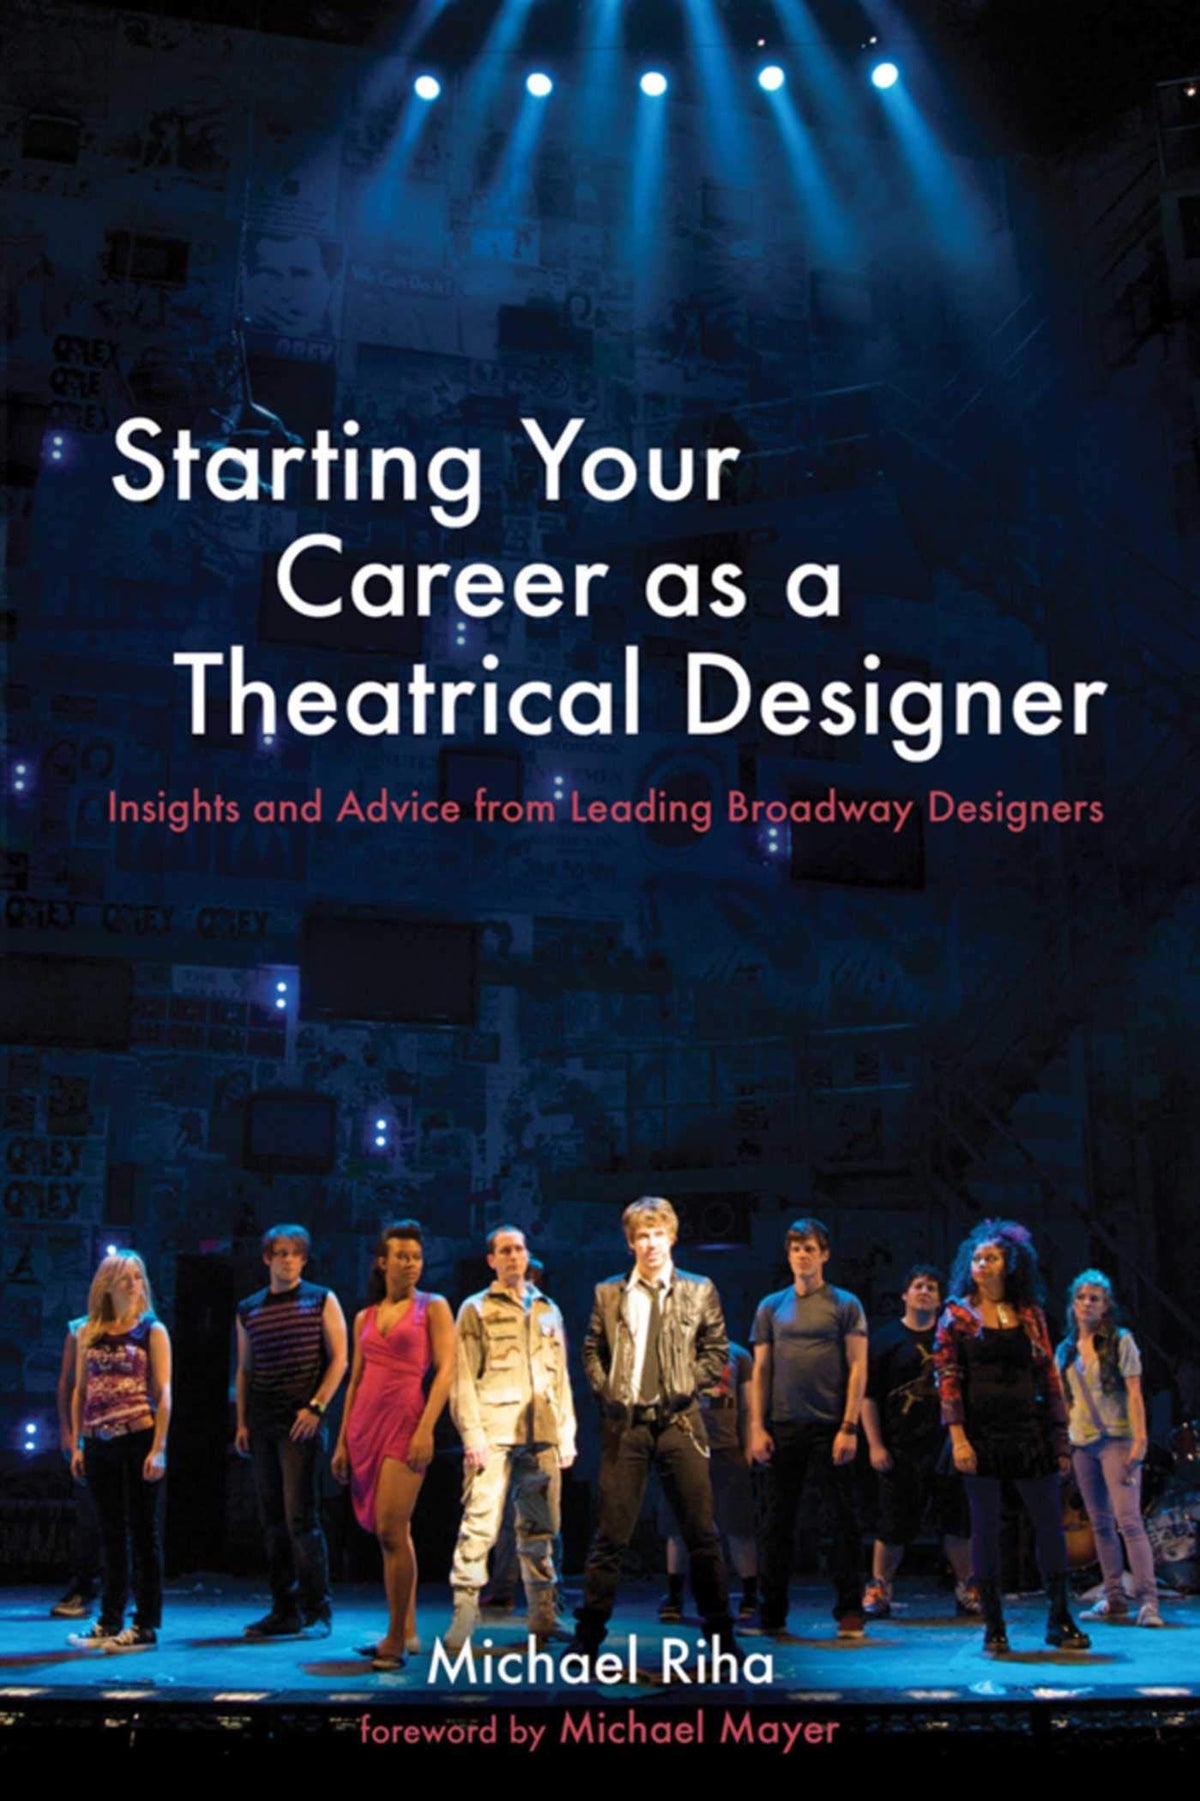 Starting Your Career as a Theatrical Designer: Insights and Advice from Leading Broadway Designers